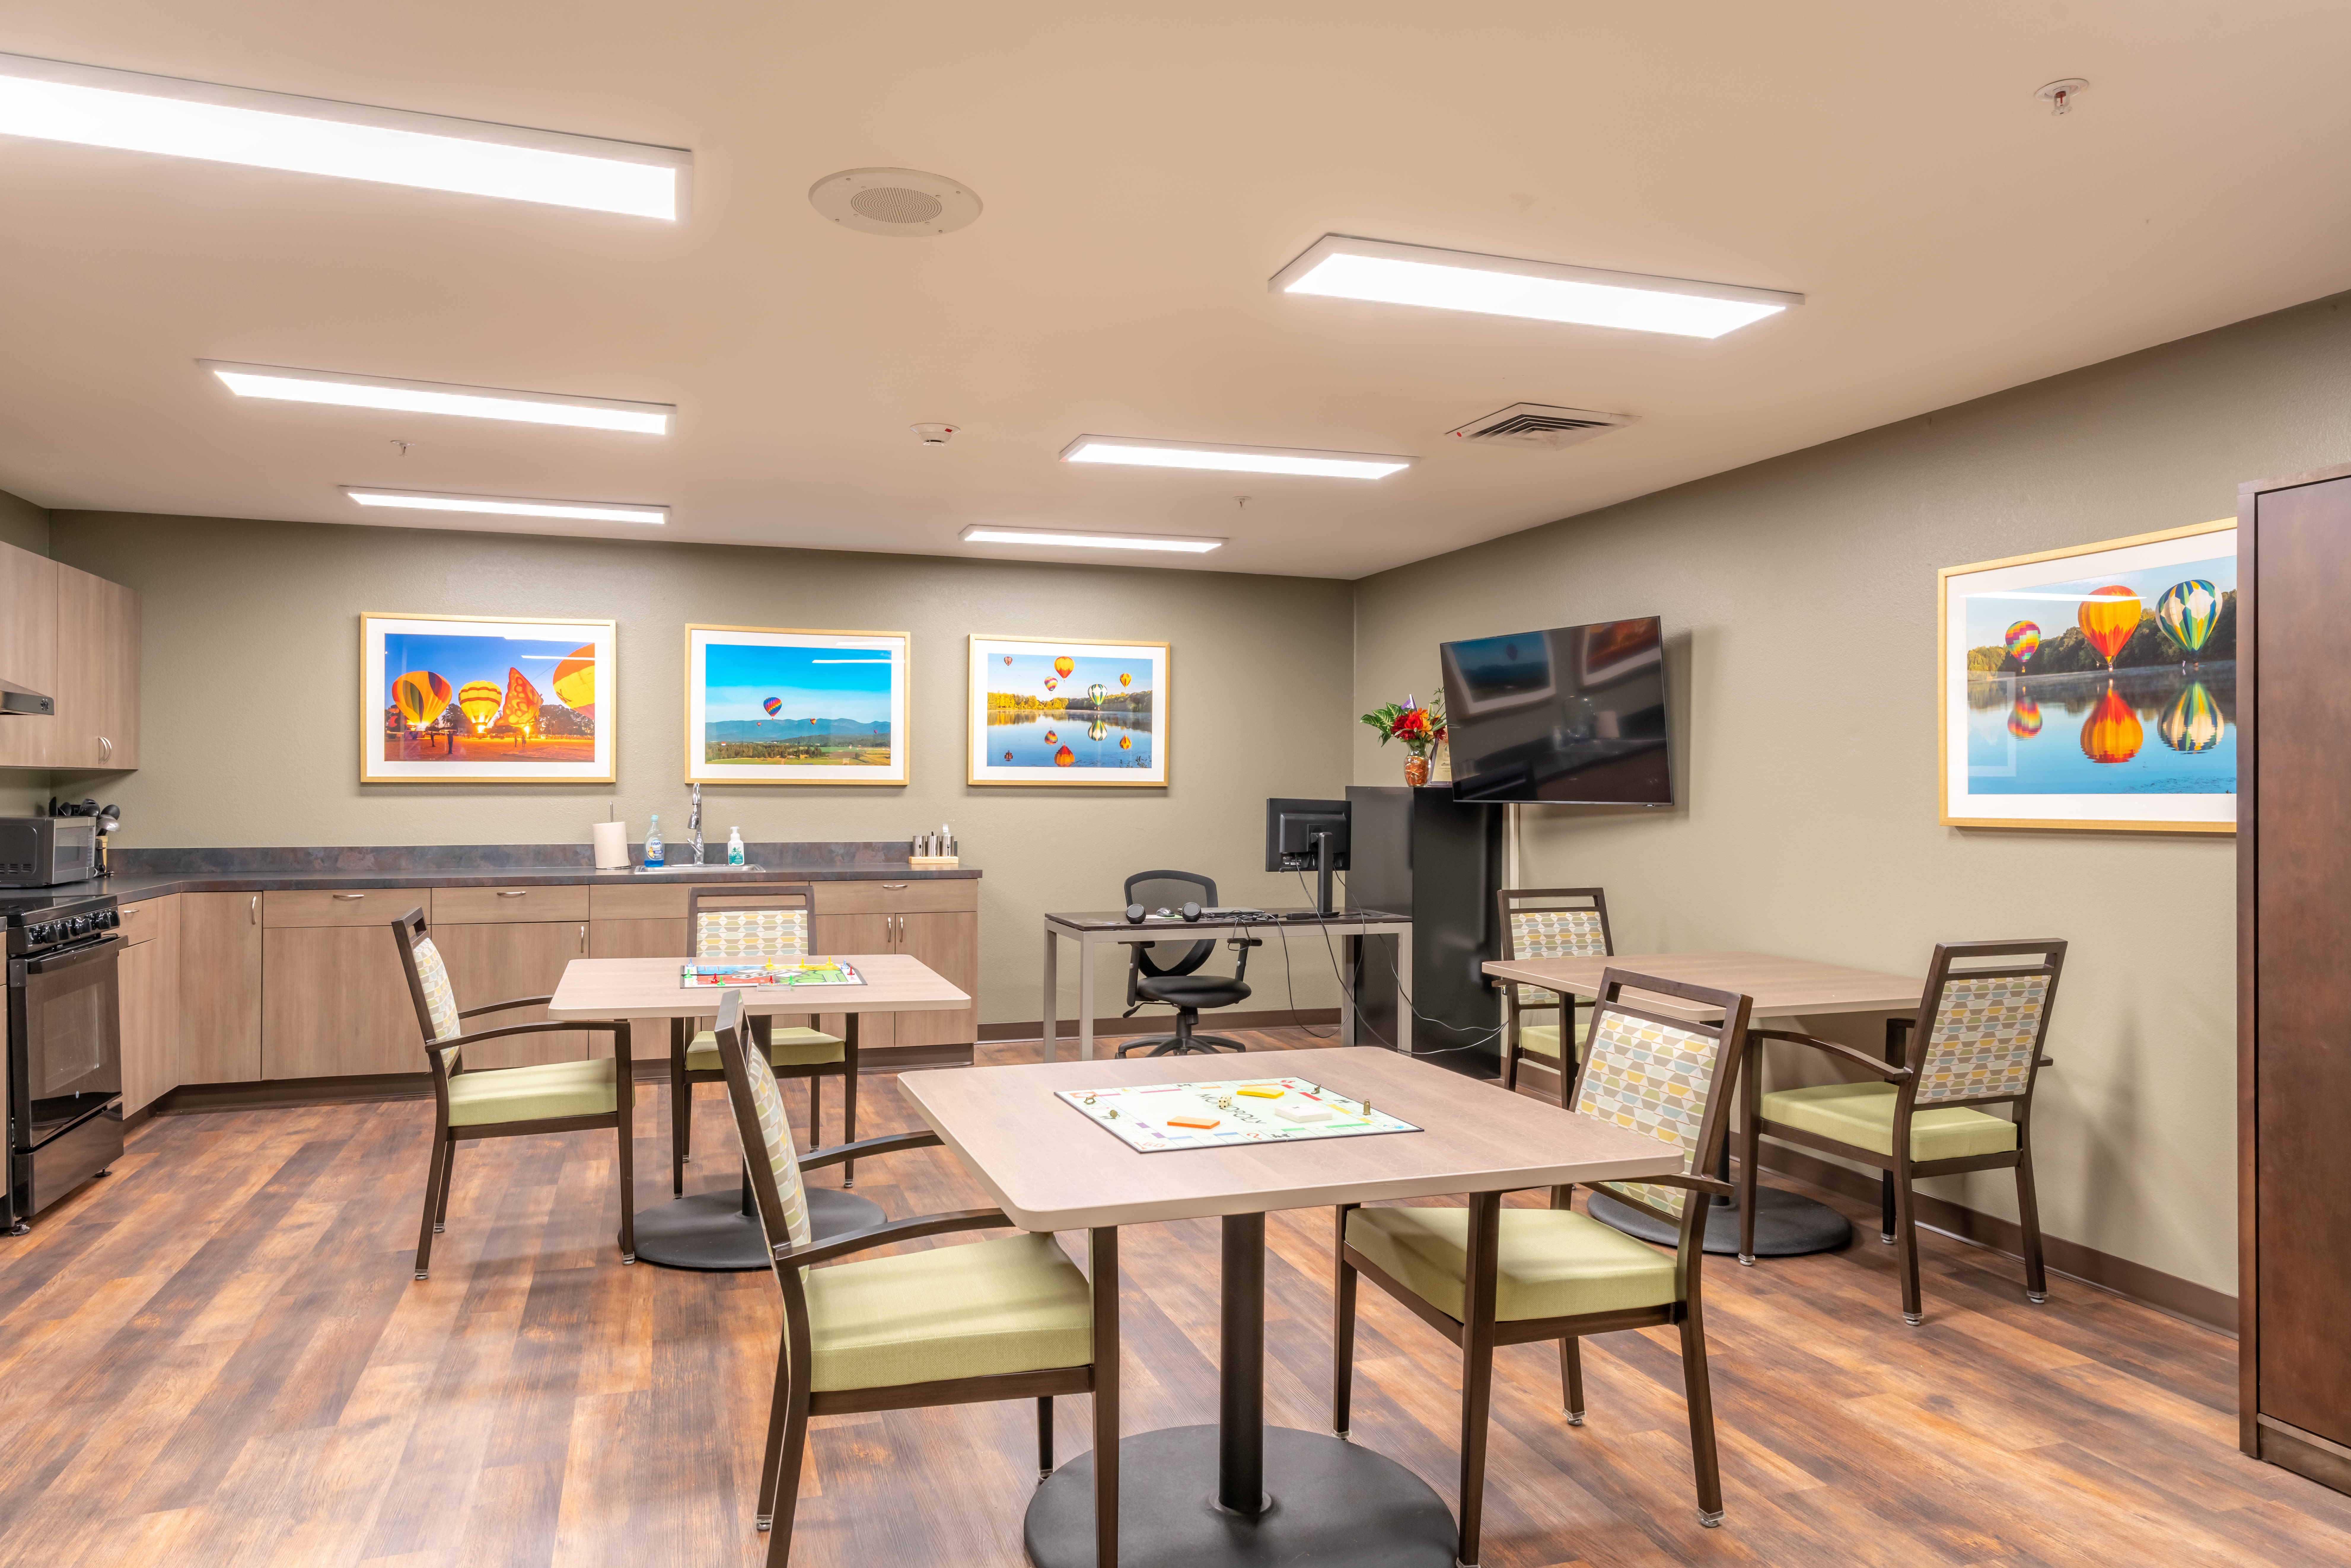 Activity room at Heron Pointe Senior Living in Monmouth, Oregon